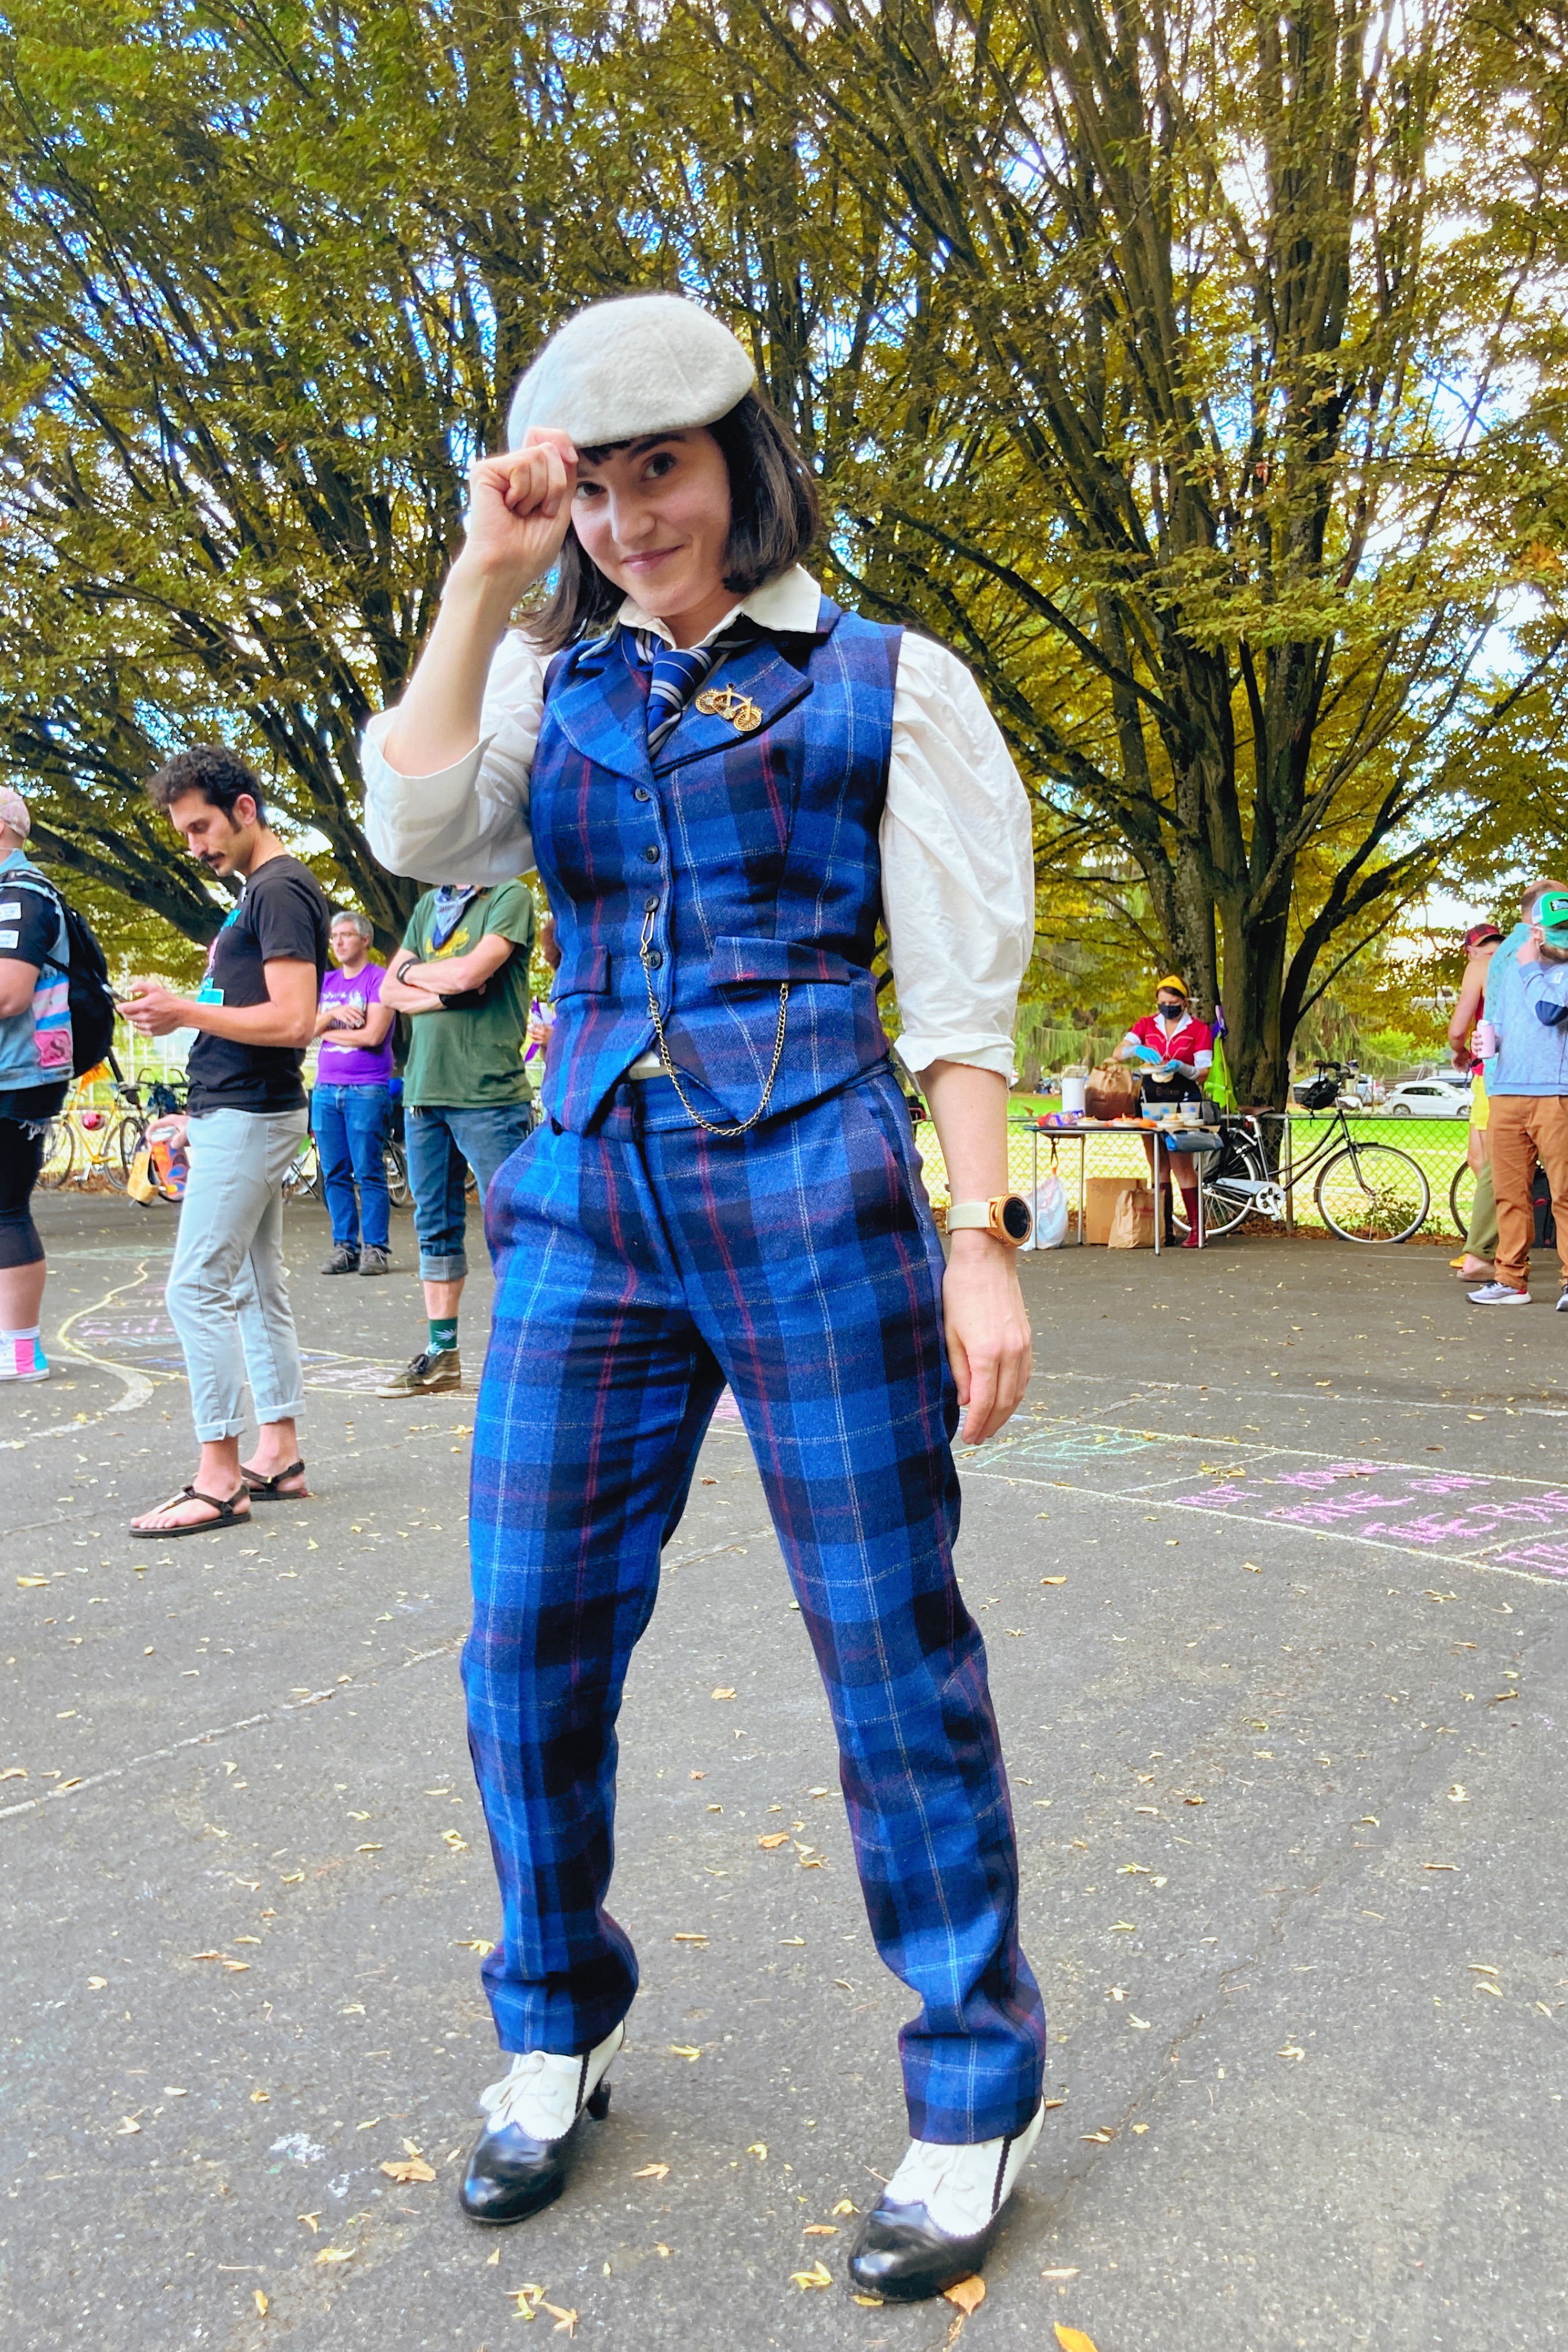 Me in a blue plaid waistcoat and blue plaid pants, black and white oxford shoes and gray flatcap. Standing in front of a group of people and trees on a sunny day